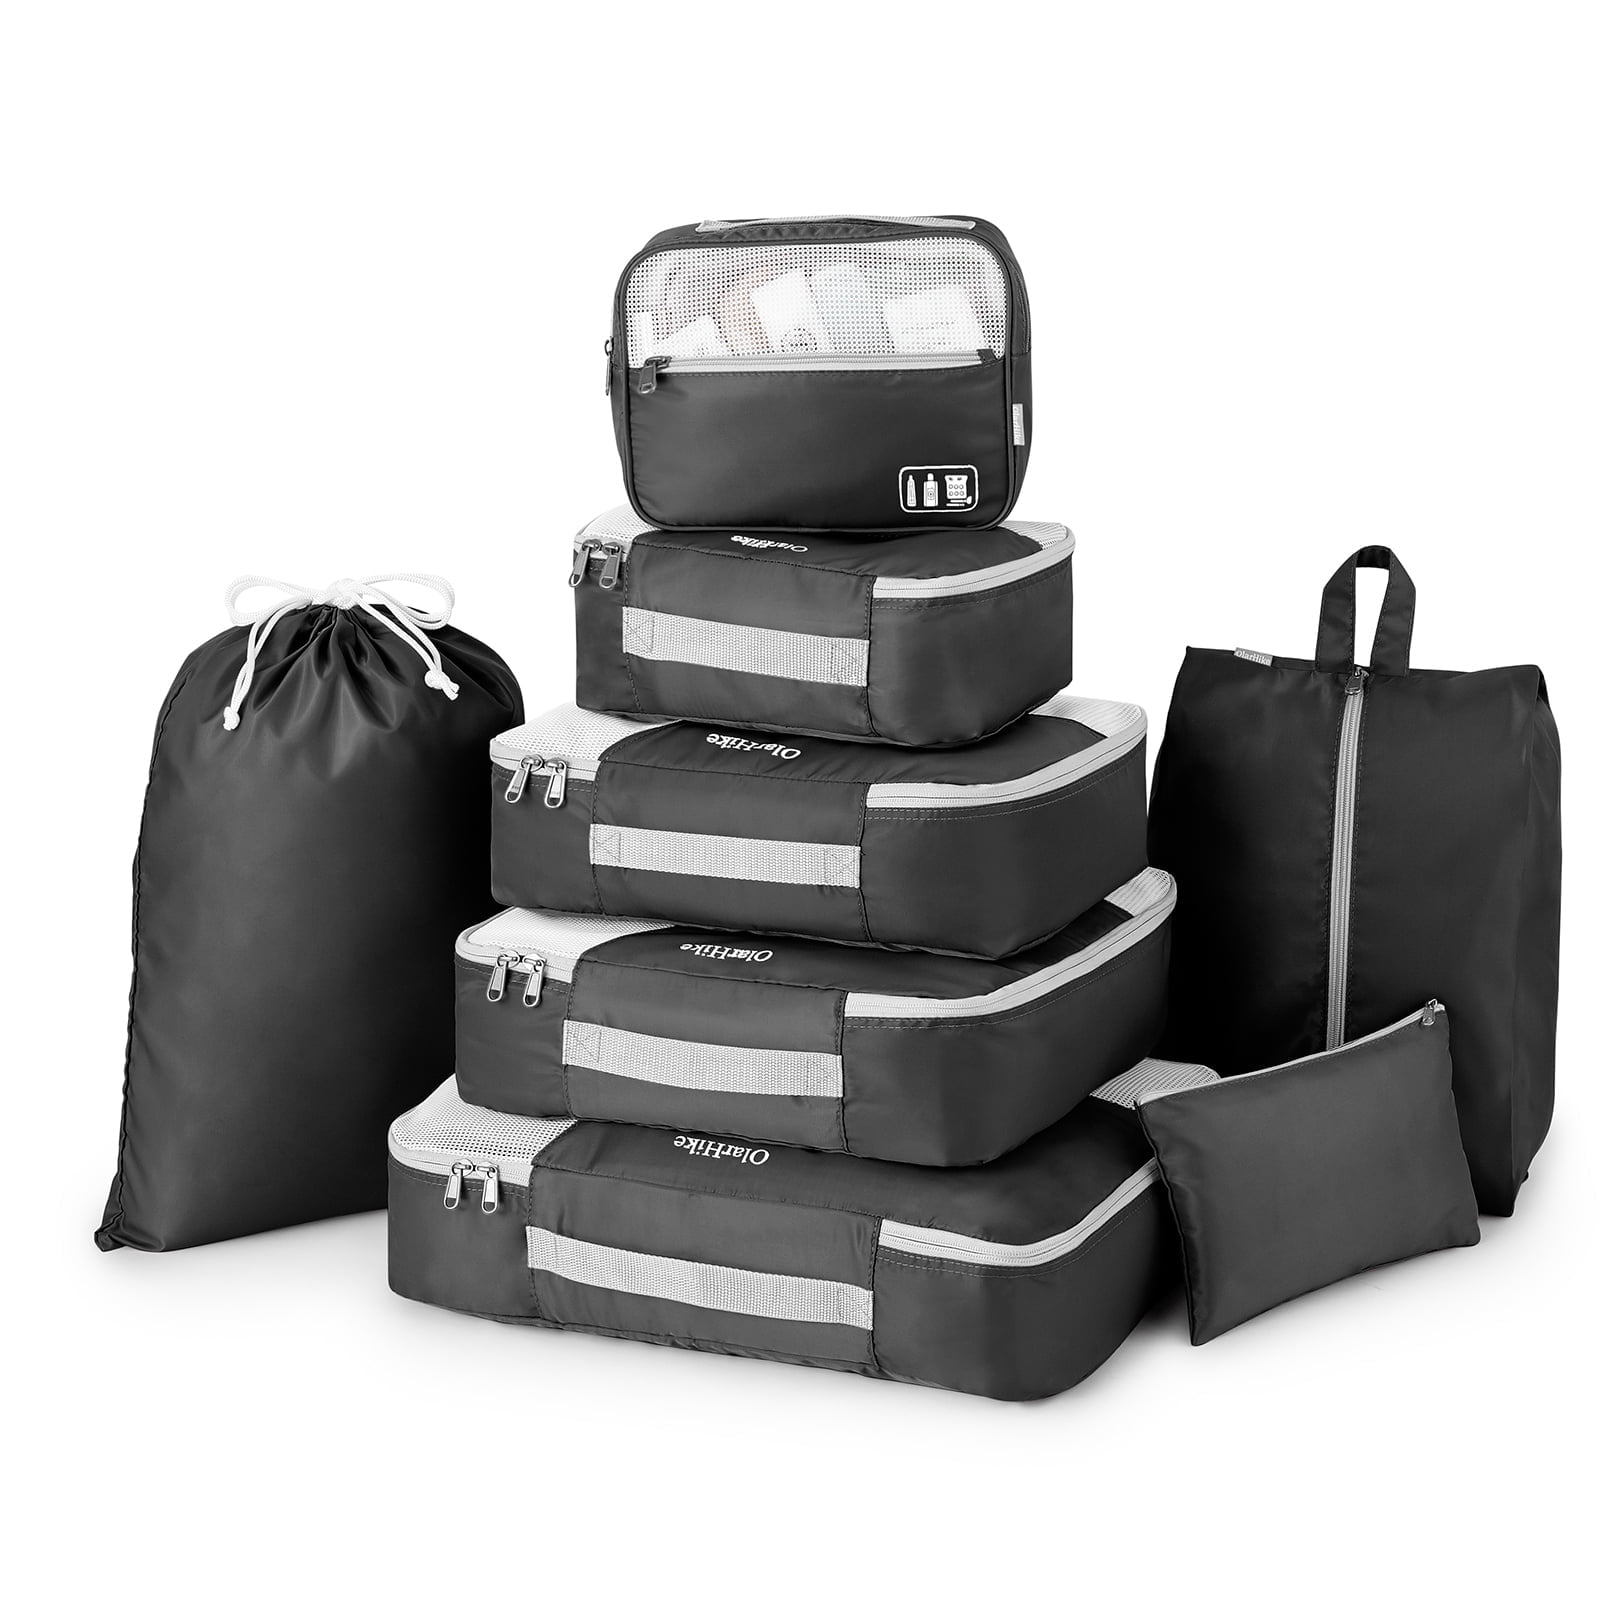 BAGAIL Clear Packing Cubes Packing Organizer for Travel Accessories Luggage Suitcase, Black 3set